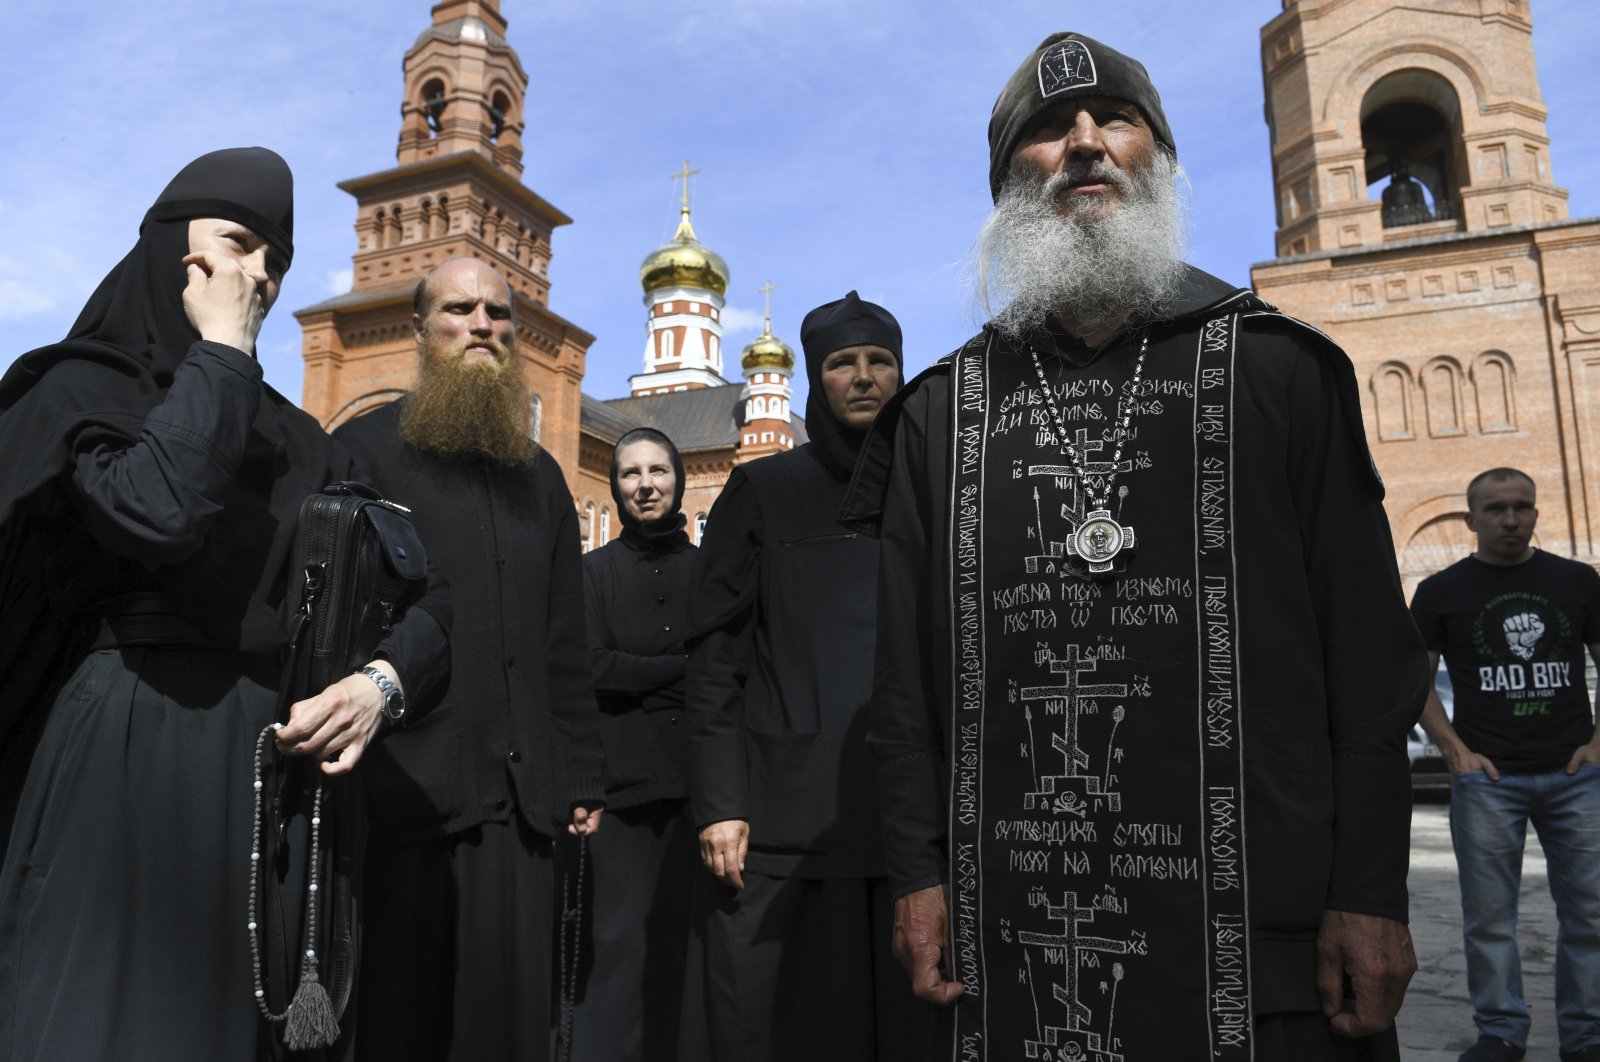 Father Sergiy, a Russian monk who has defied the Russian Orthodox Church's leadership, right, speaks to journalists in Sredneuralsk, in the Russian Urals on Wednesday, June 17, 2020. (AP Photo)